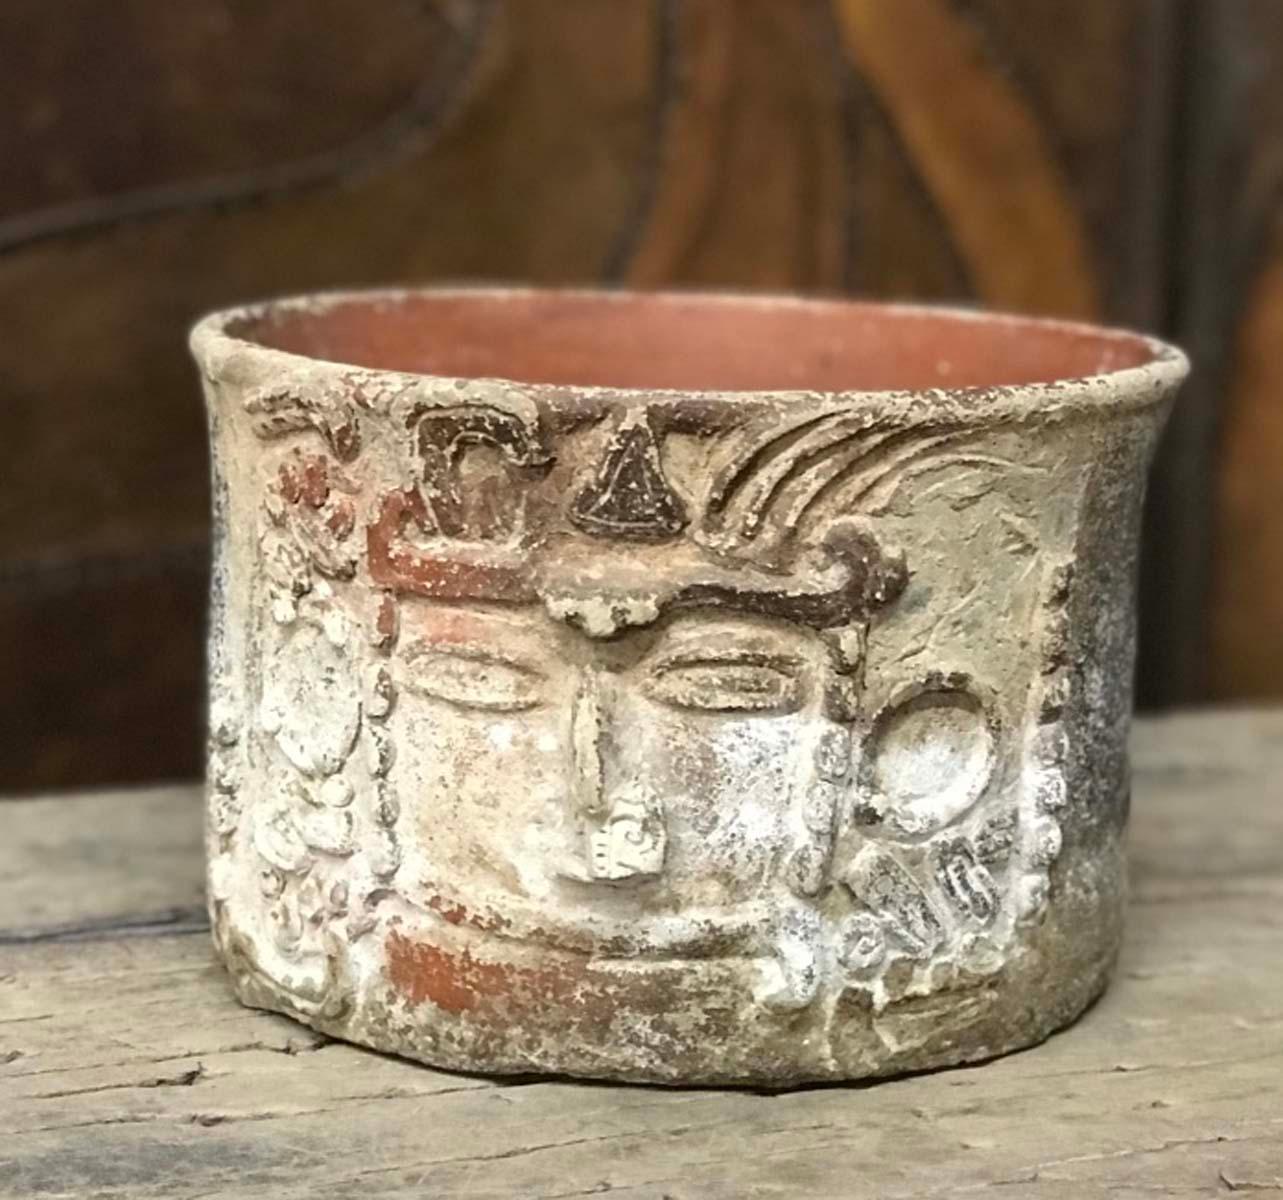 Very old, indigenous Mayan terracotta vessel depicting a face in relief.
Much of the paint has been lost but there is gesso and traces of figurative drawings on the back, with some very old red and black paint. Beautiful ritual vessel. Ancient but